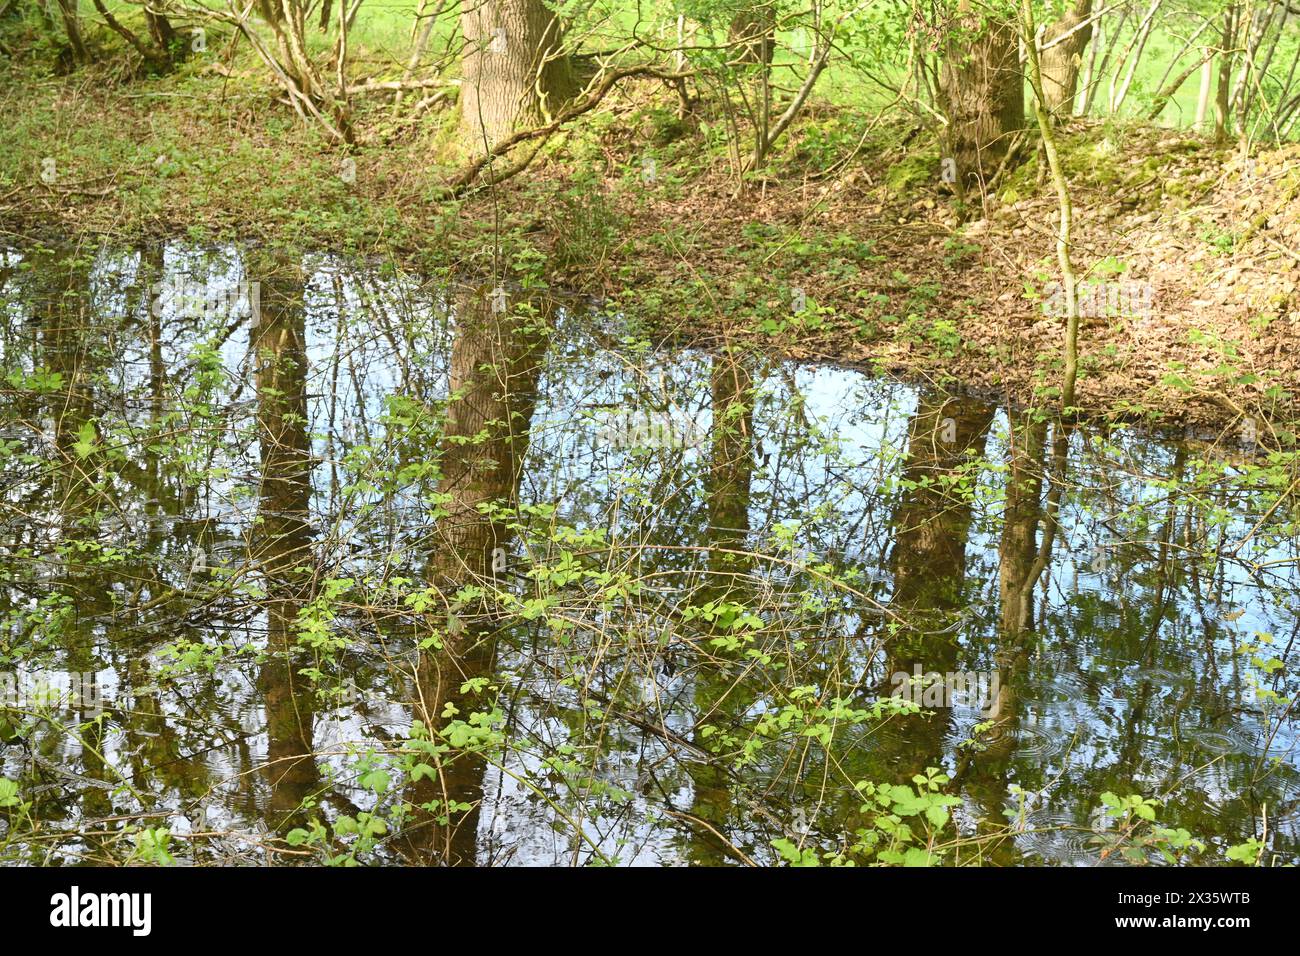 NL, Eesergroen: Spring characterises the landscape, towns and people in the province of Drenthe in the Netherlands. May green in April, forest in Dren Stock Photo